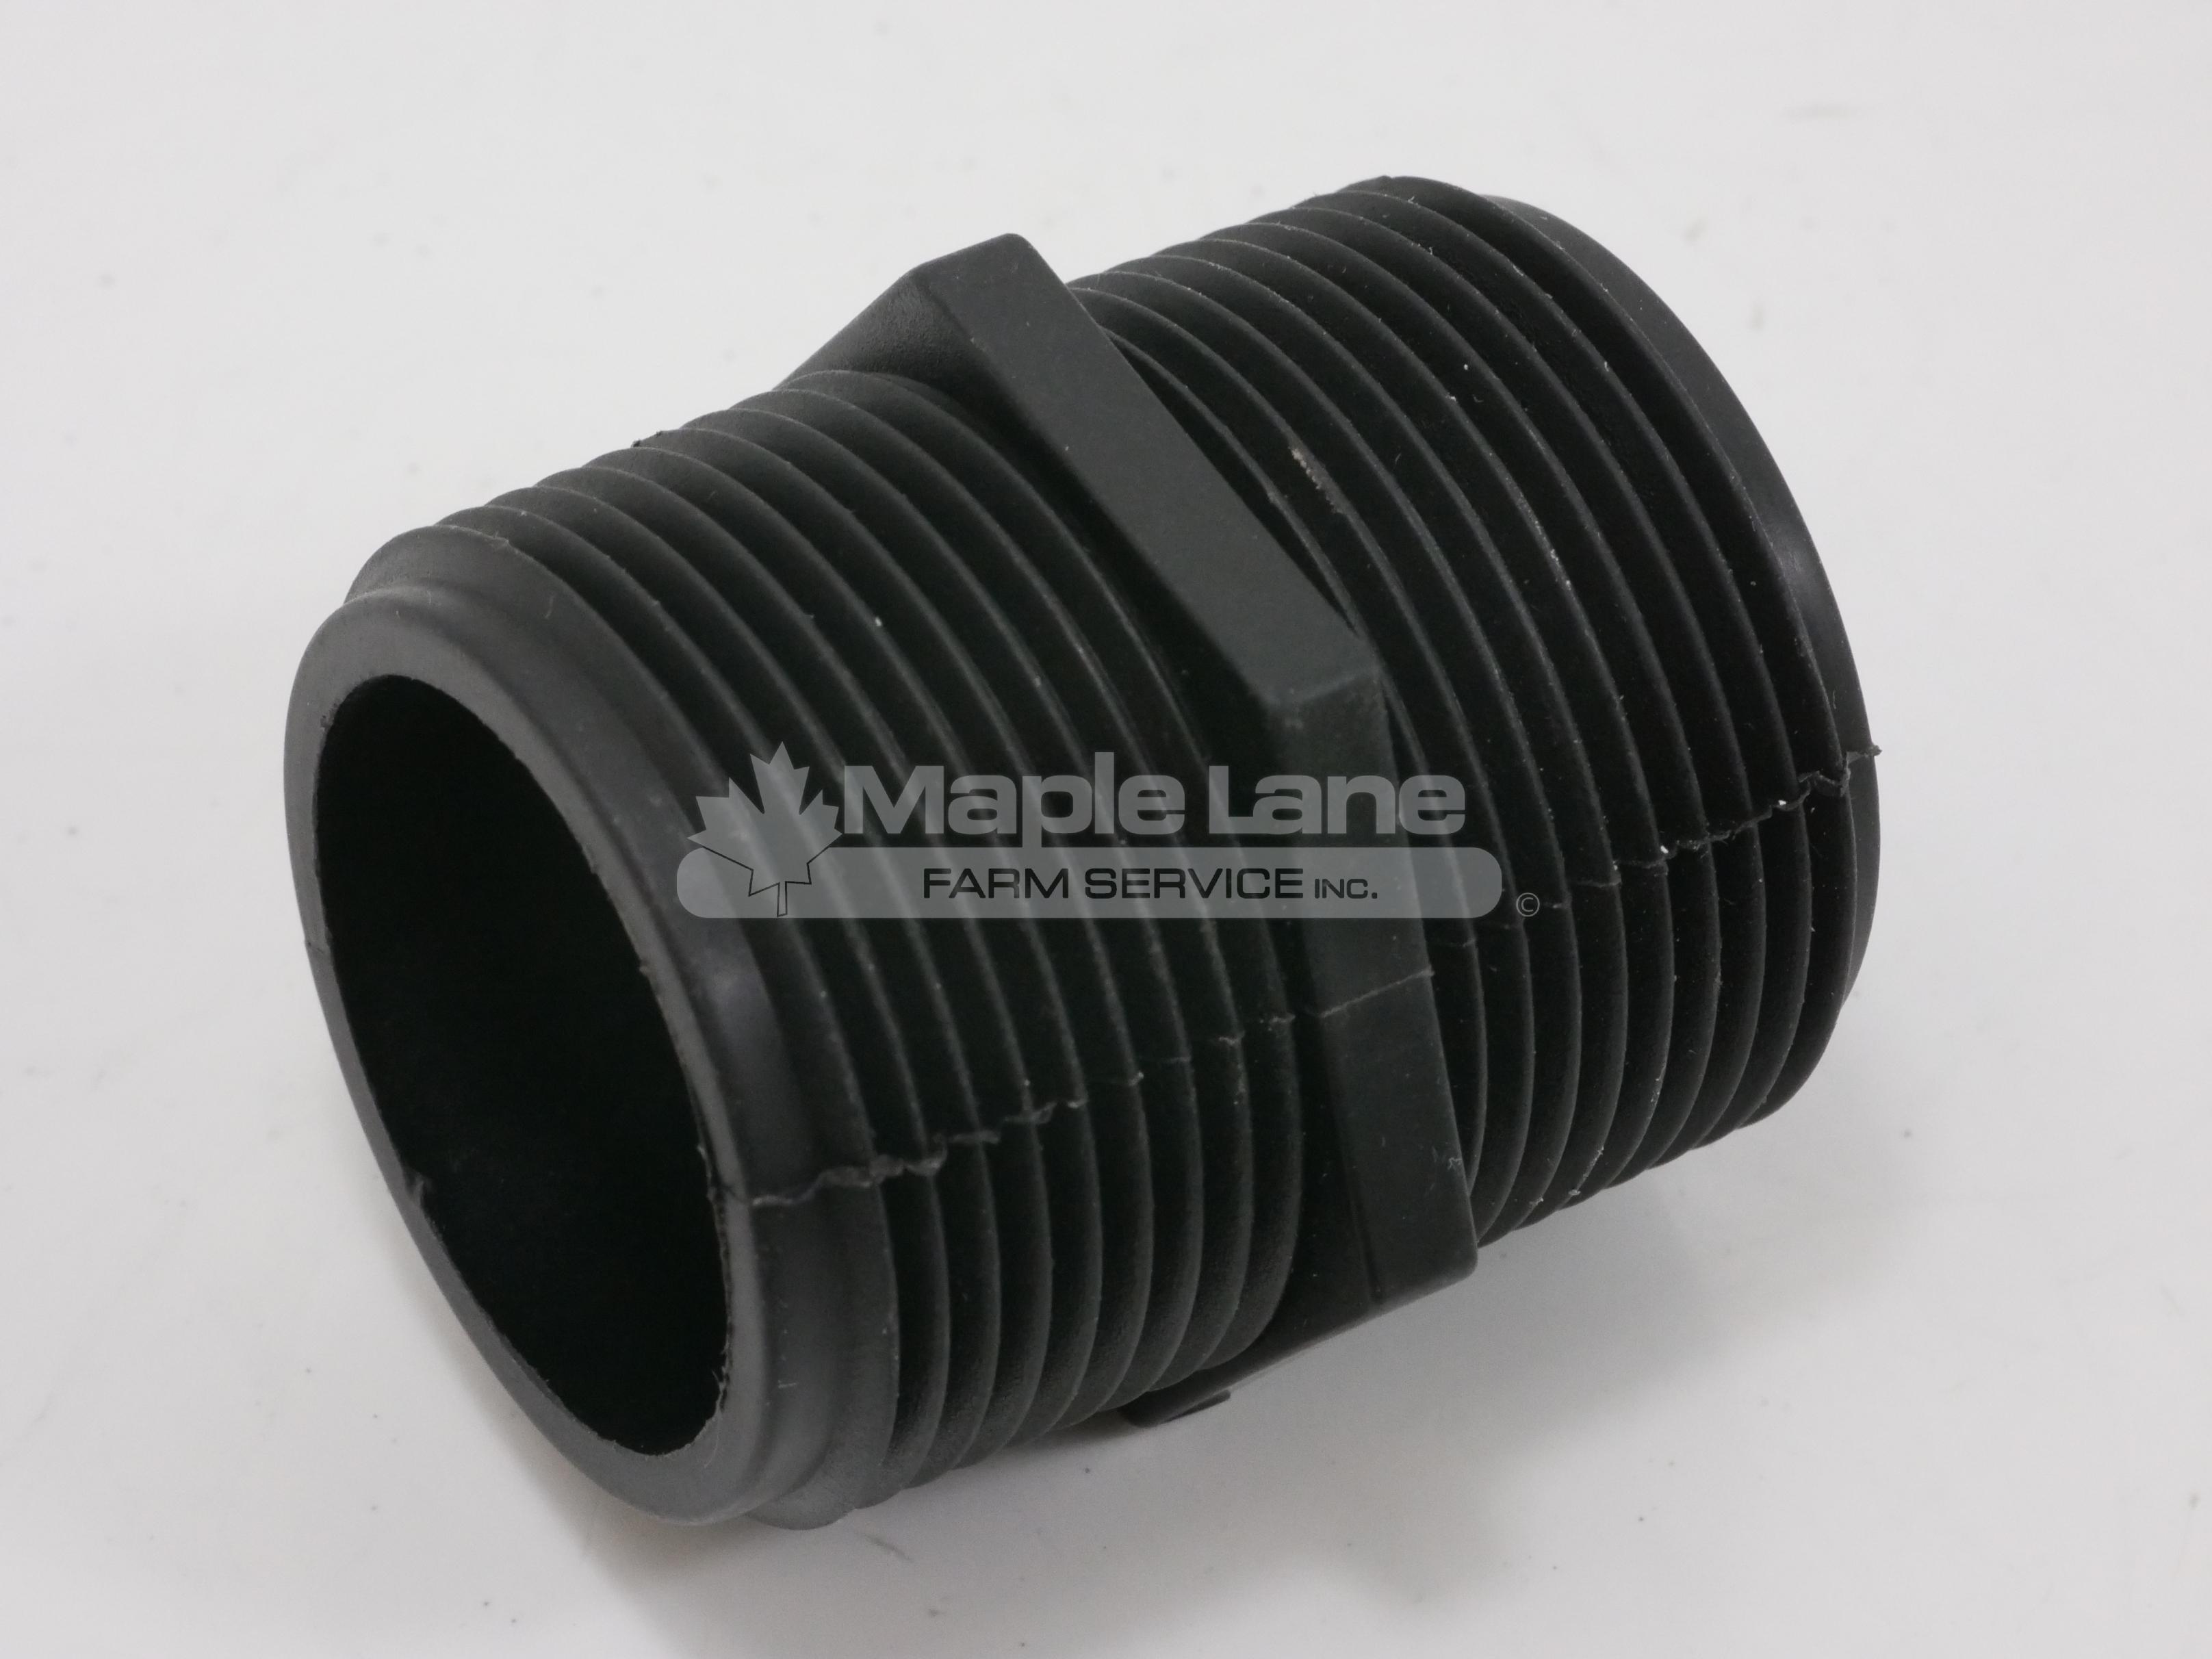 AG051157 Poly Fitting 1-1/4" NPT